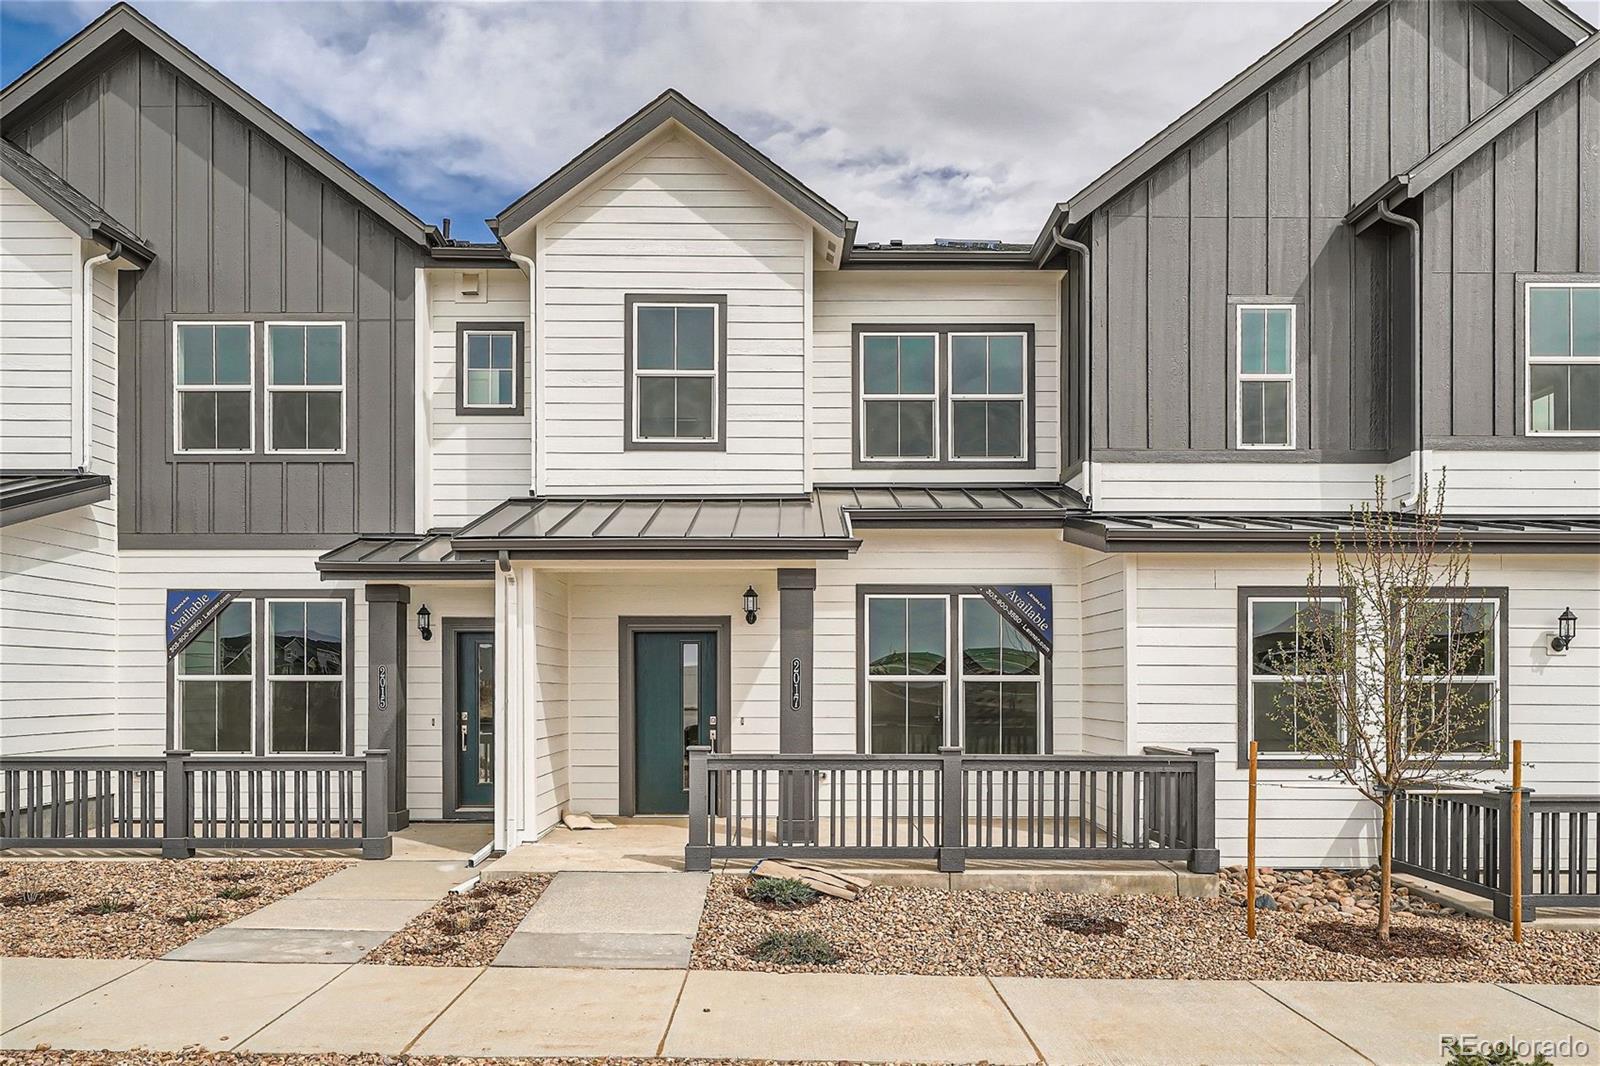 Photo one of 2017 S Gold Bug Way Aurora CO 80018 | MLS 3879797